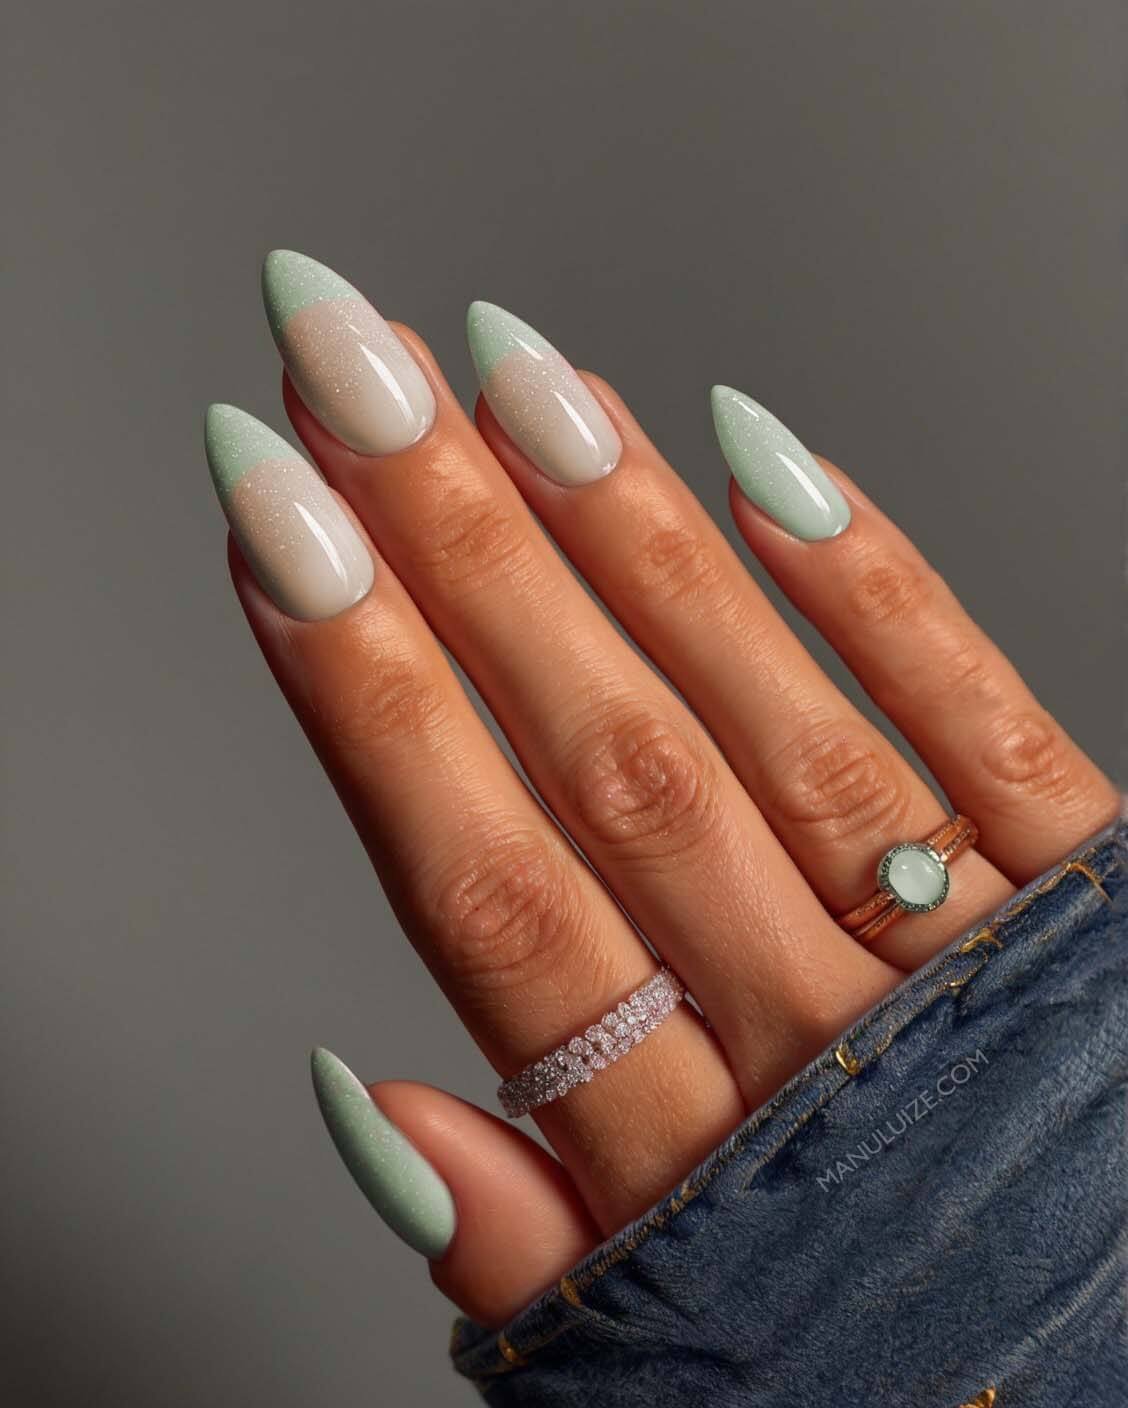 Green french nails for spring/summer